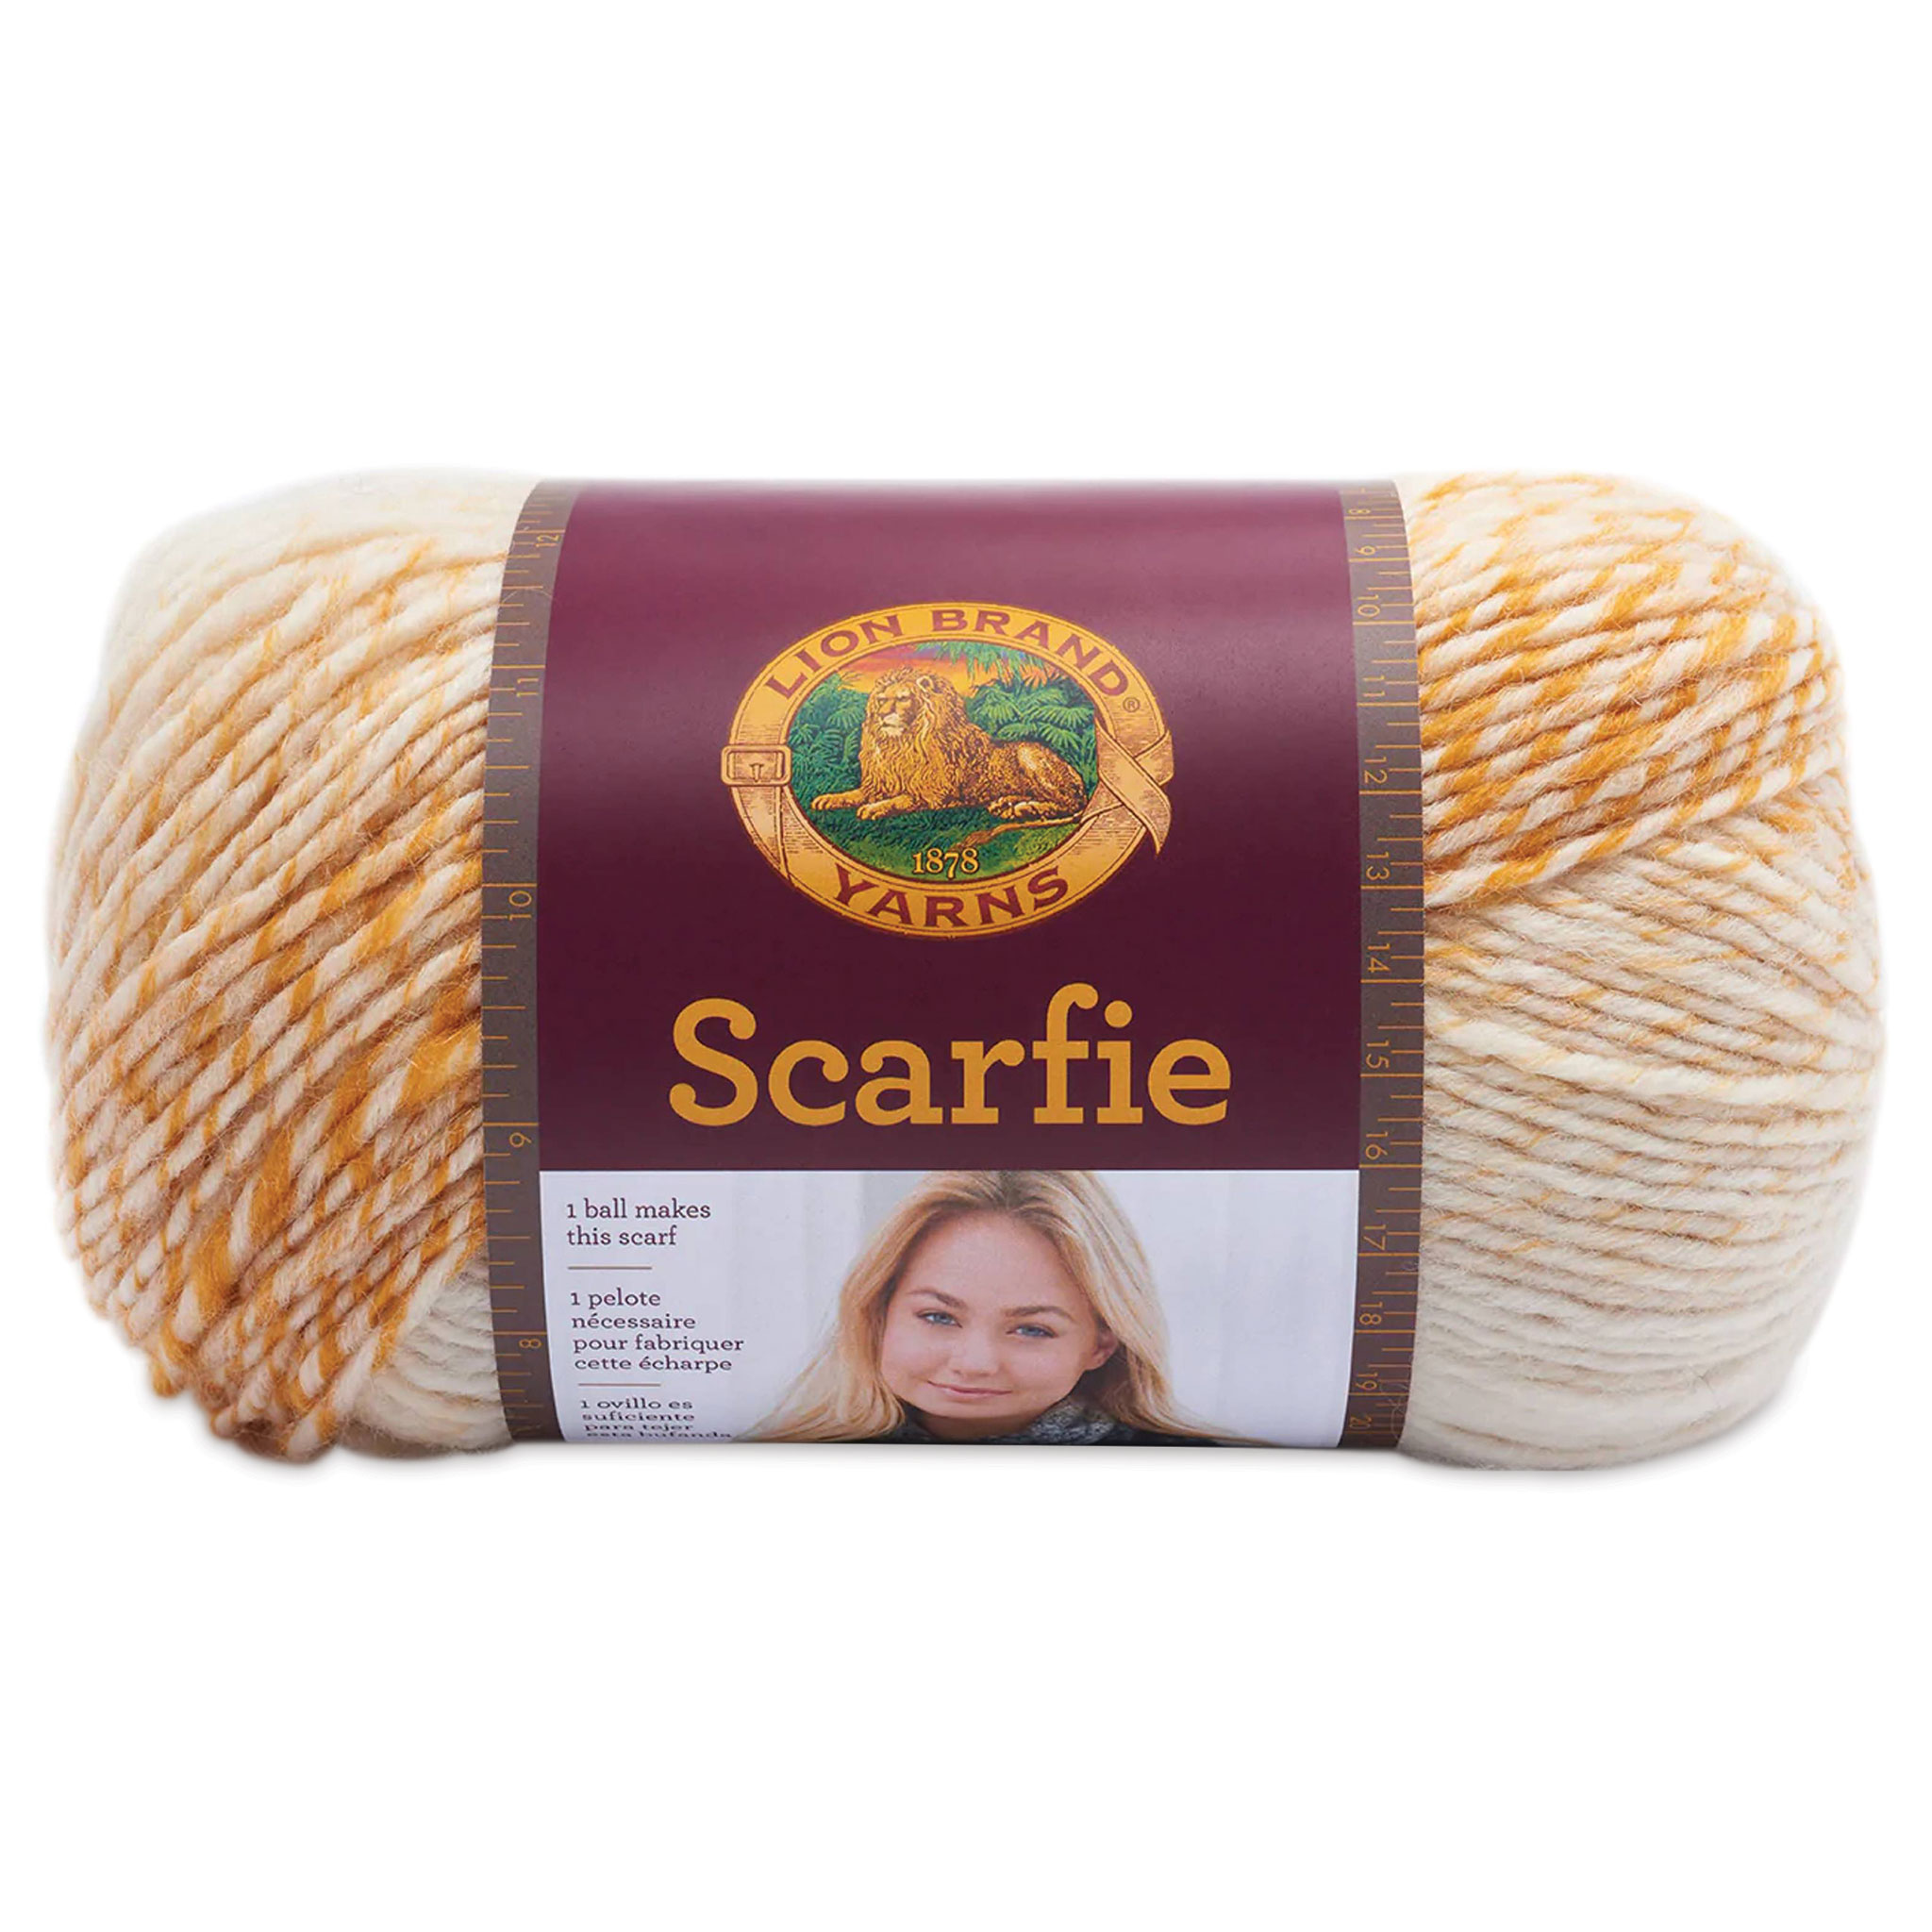 Lion Brand Yarn Scarfie Taupe Charcoal 